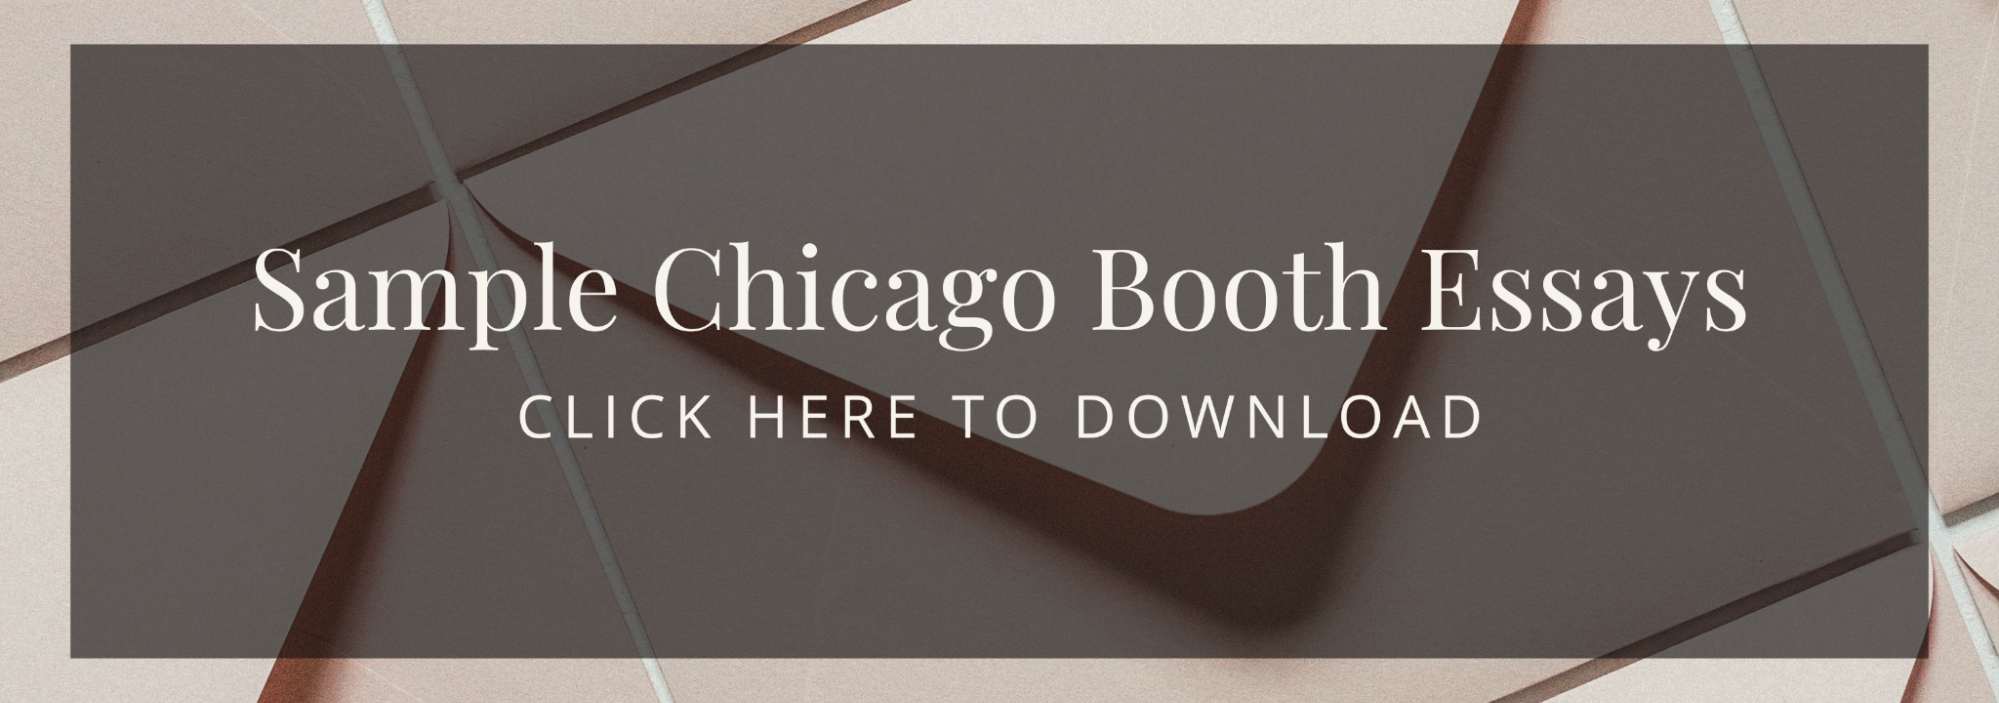 chicago booth mba essay examples